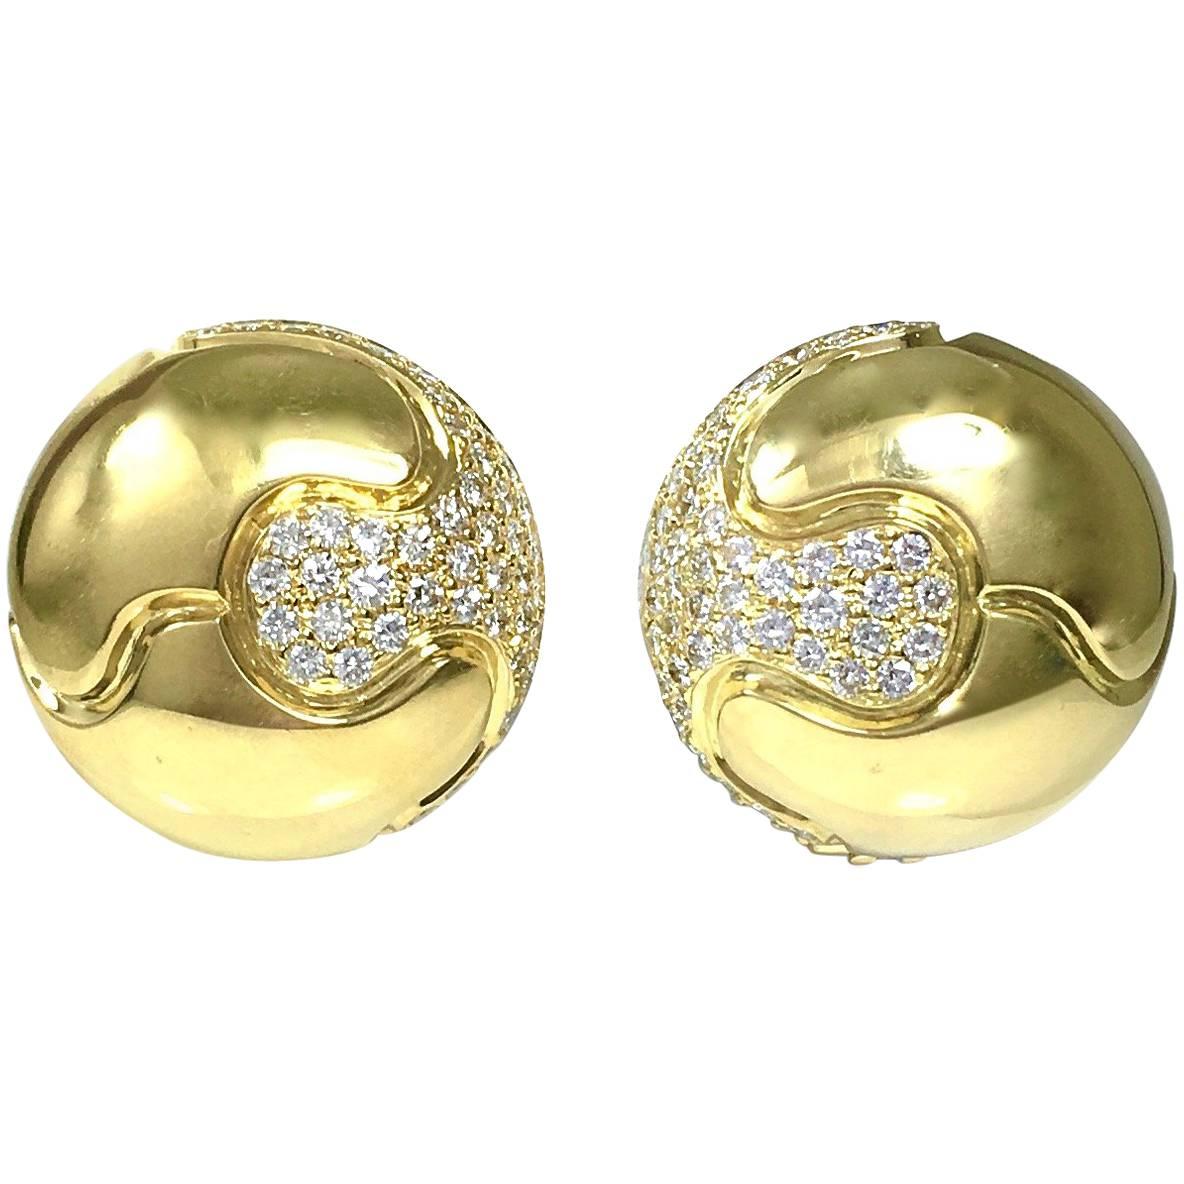 Large 3 Carats of Diamonds Yellow Gold Dome Earrings For Sale